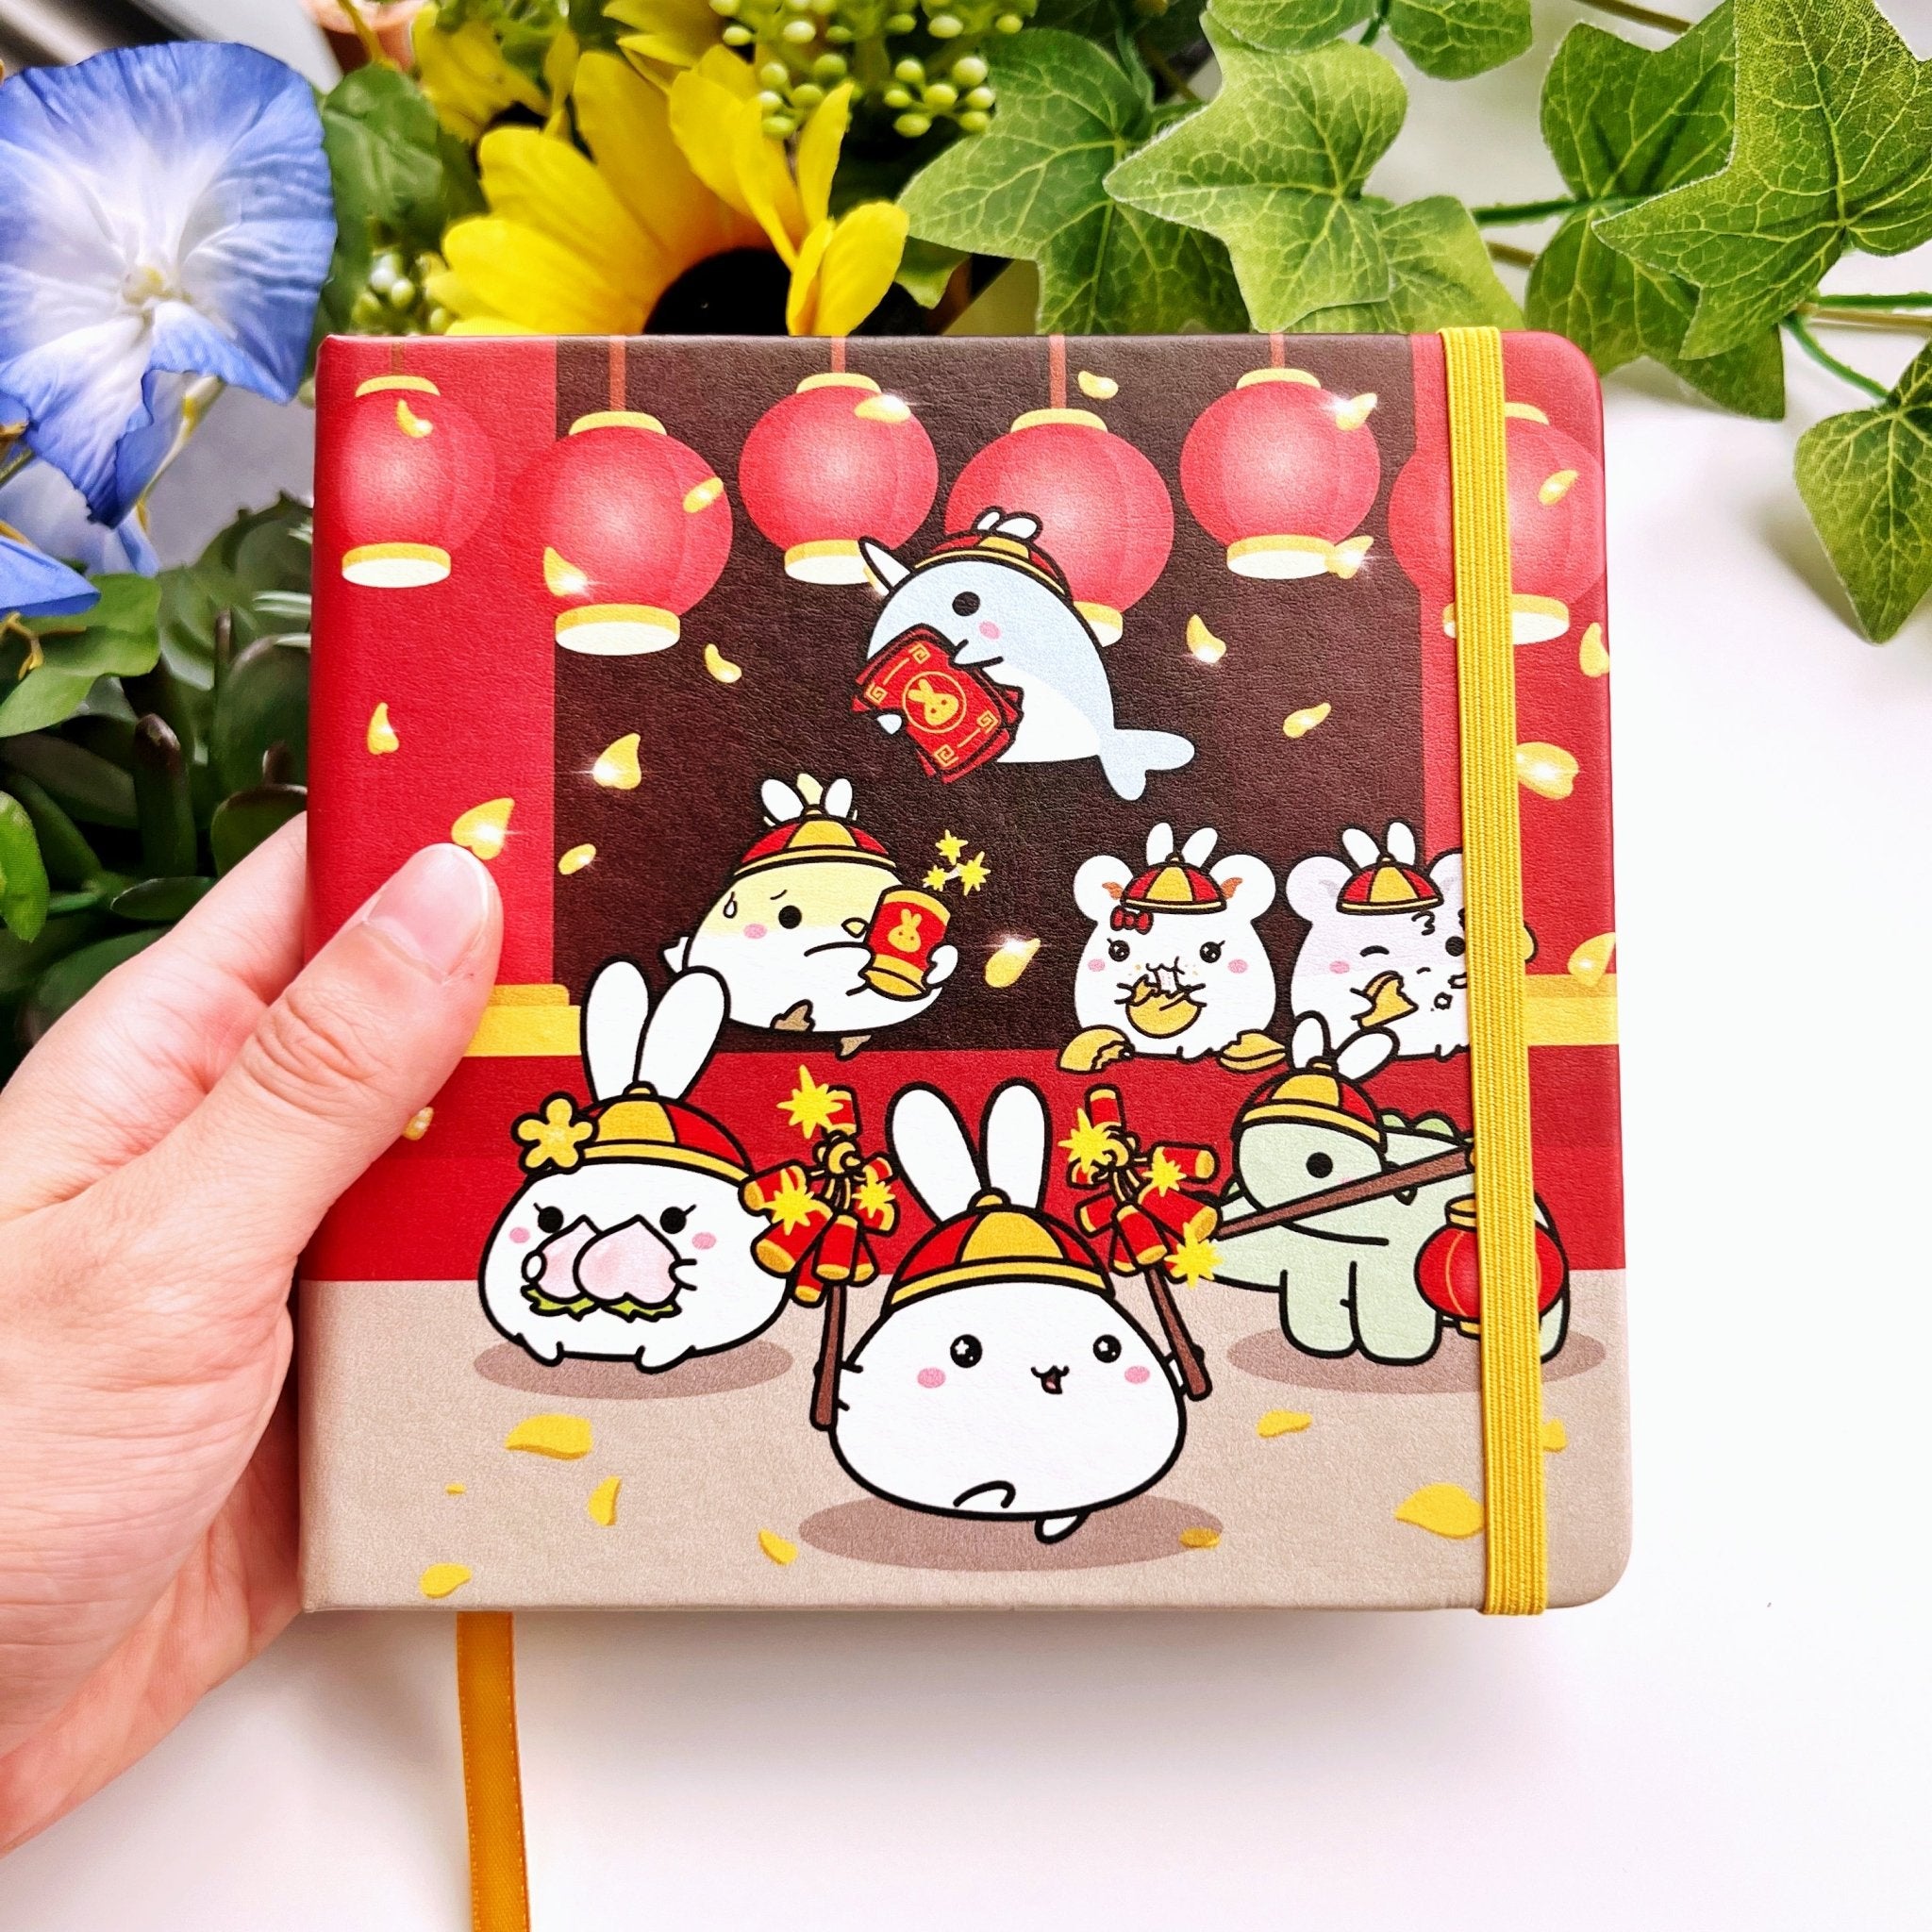 Square PU Notebook - Lunar New Year - Gold Foil (Dot Grid) - SumLilThings